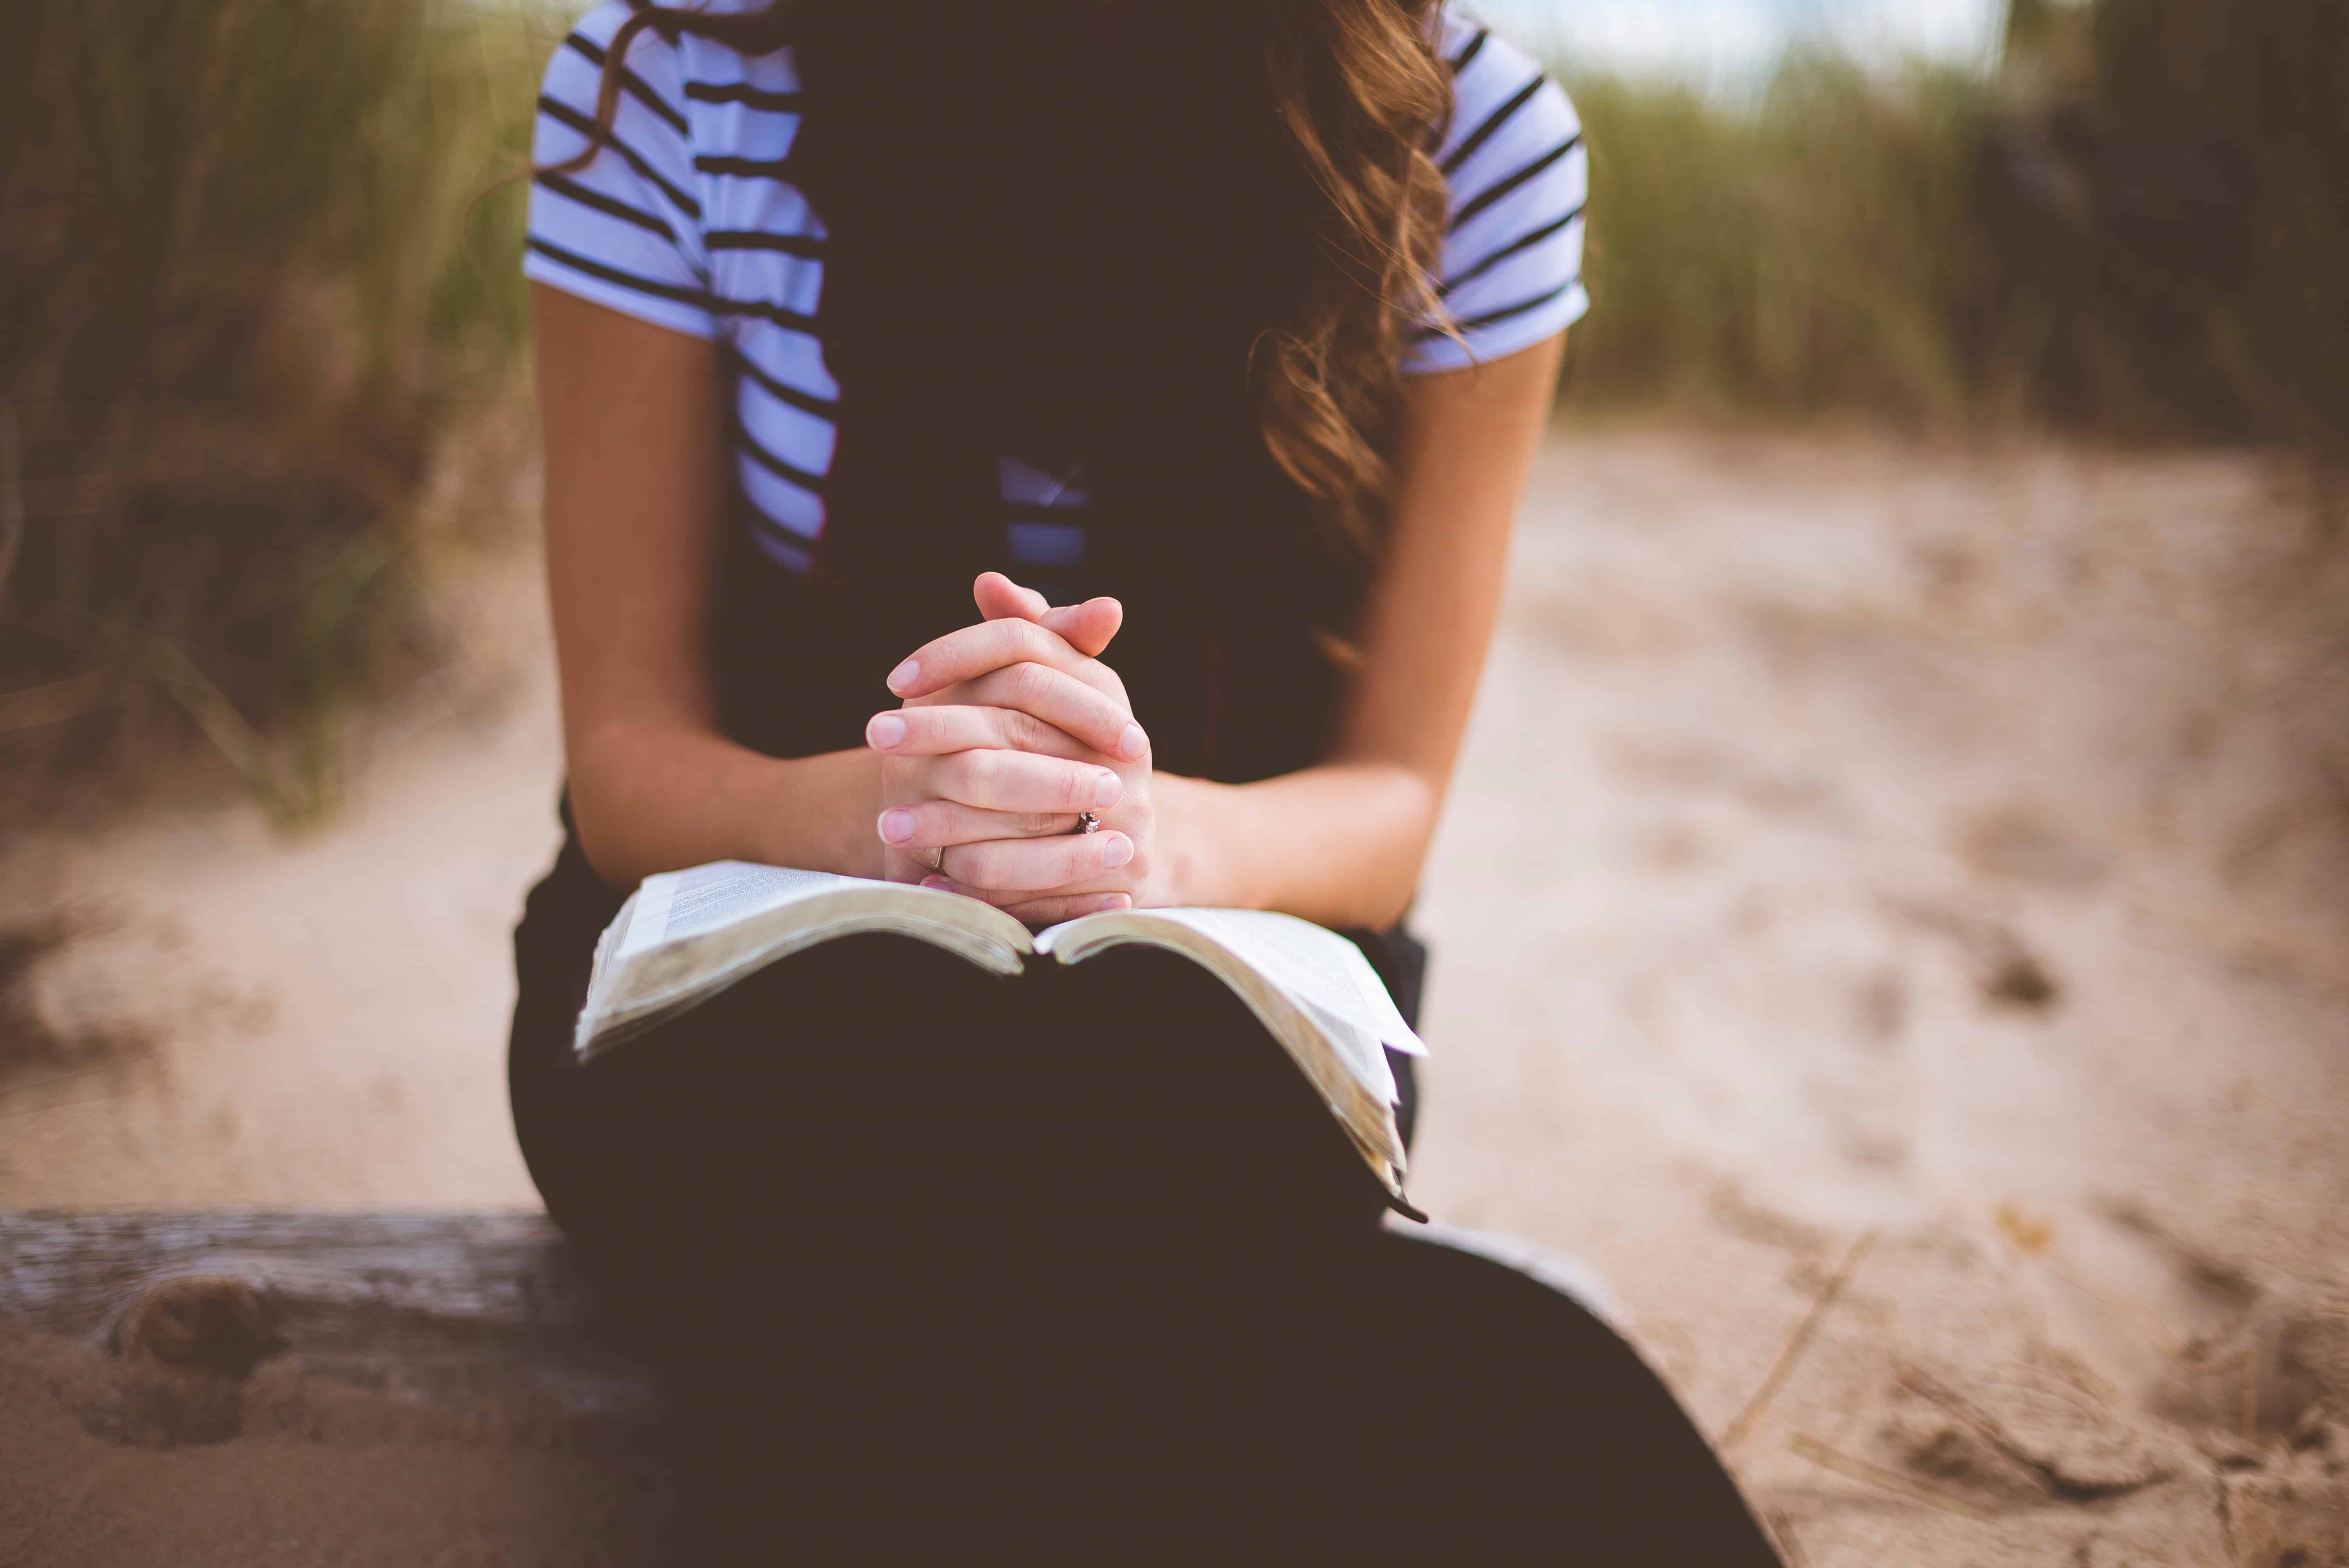 12 Encouraging Bible Verses About Hope in Hard Times